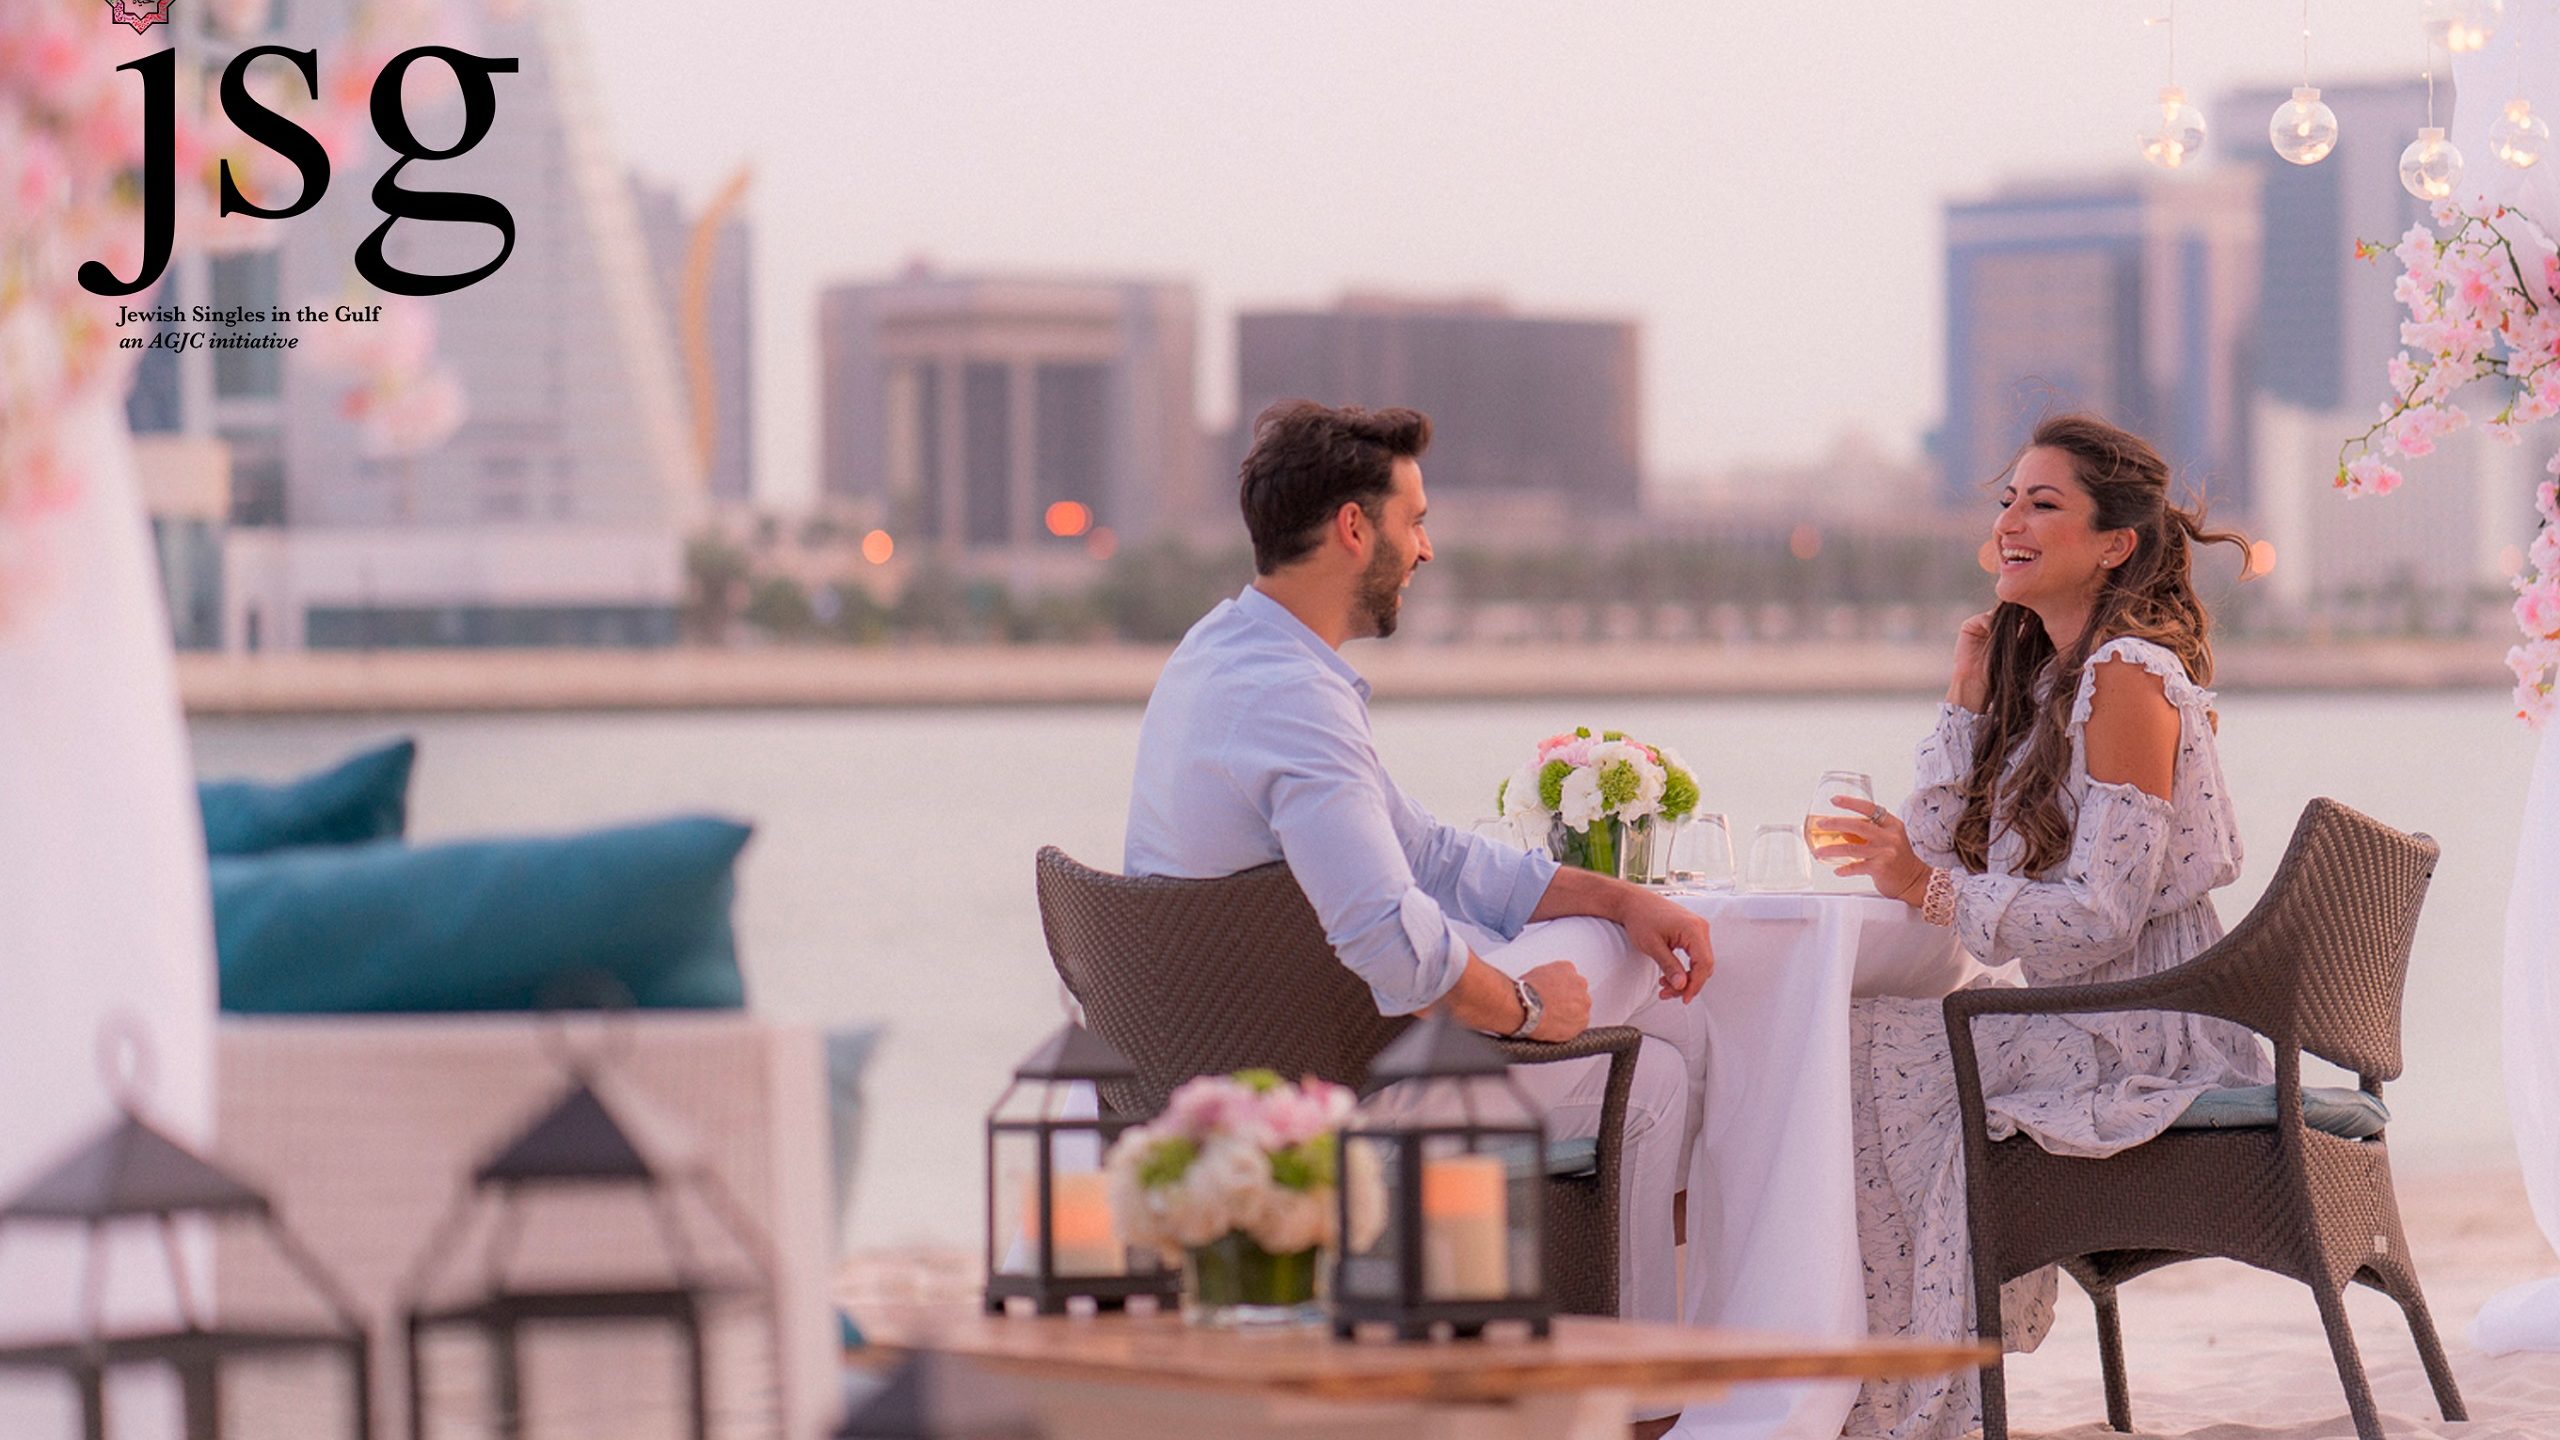 First Jewish Dating Website Debuts in the Gulf